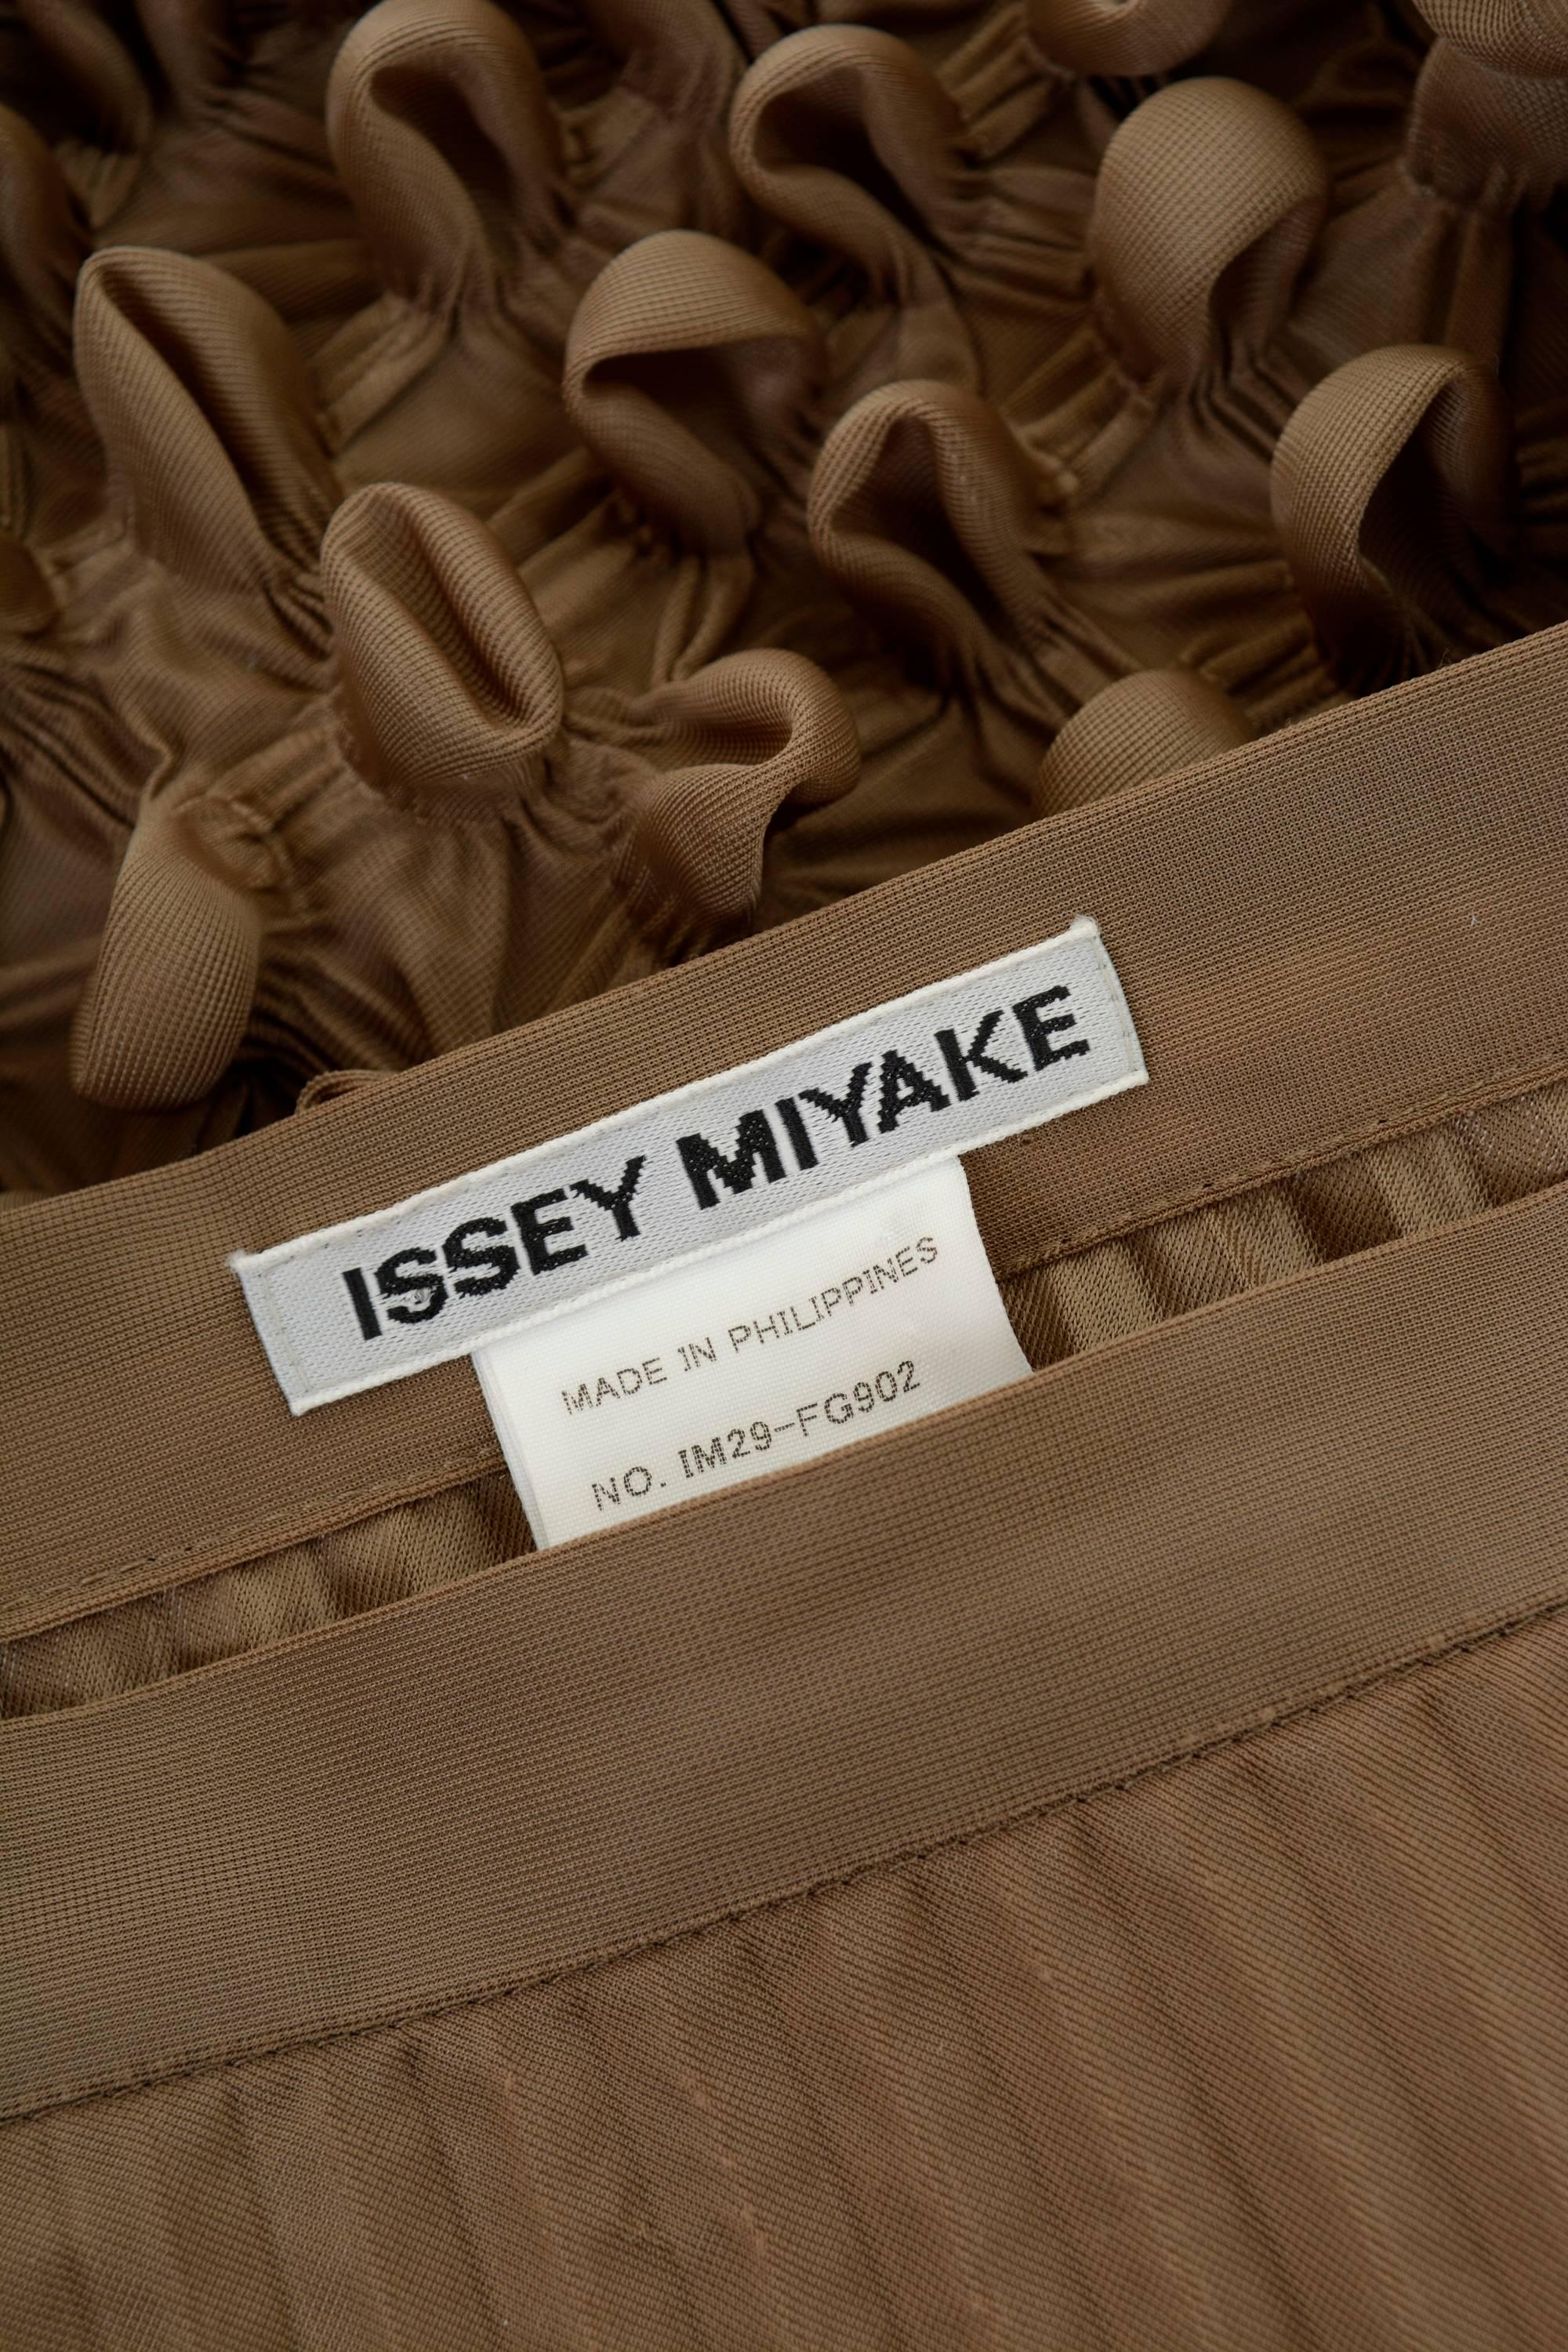 ISSEY MIYAKE Authentic Origami Pleateds Skirt In Excellent Condition In Milan, Italy